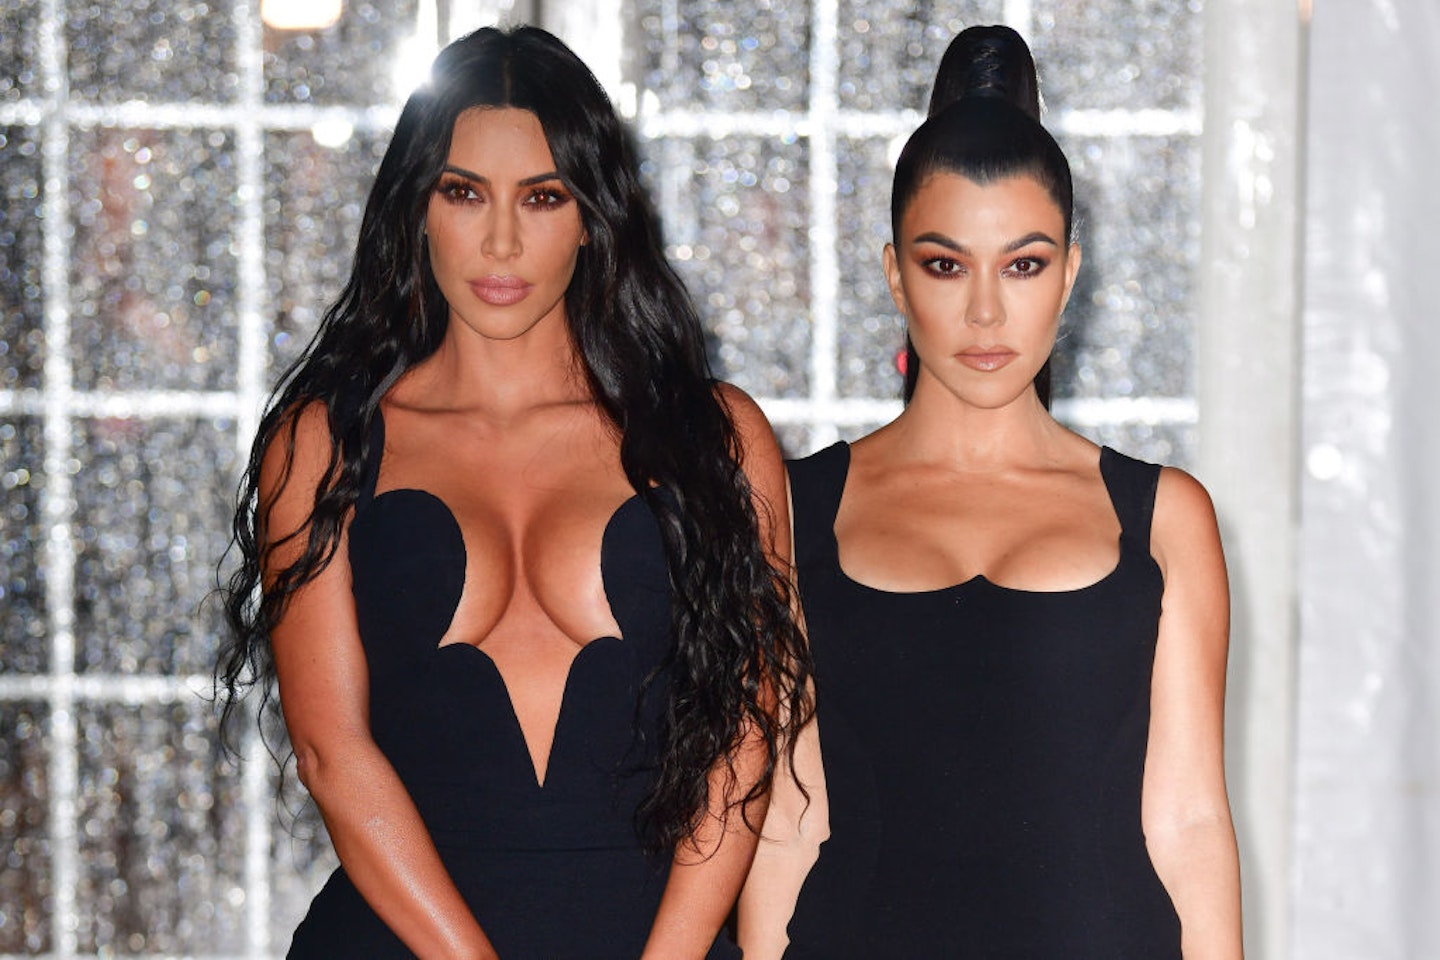 The Kardashians' most outrageous luxury moments, from diamond